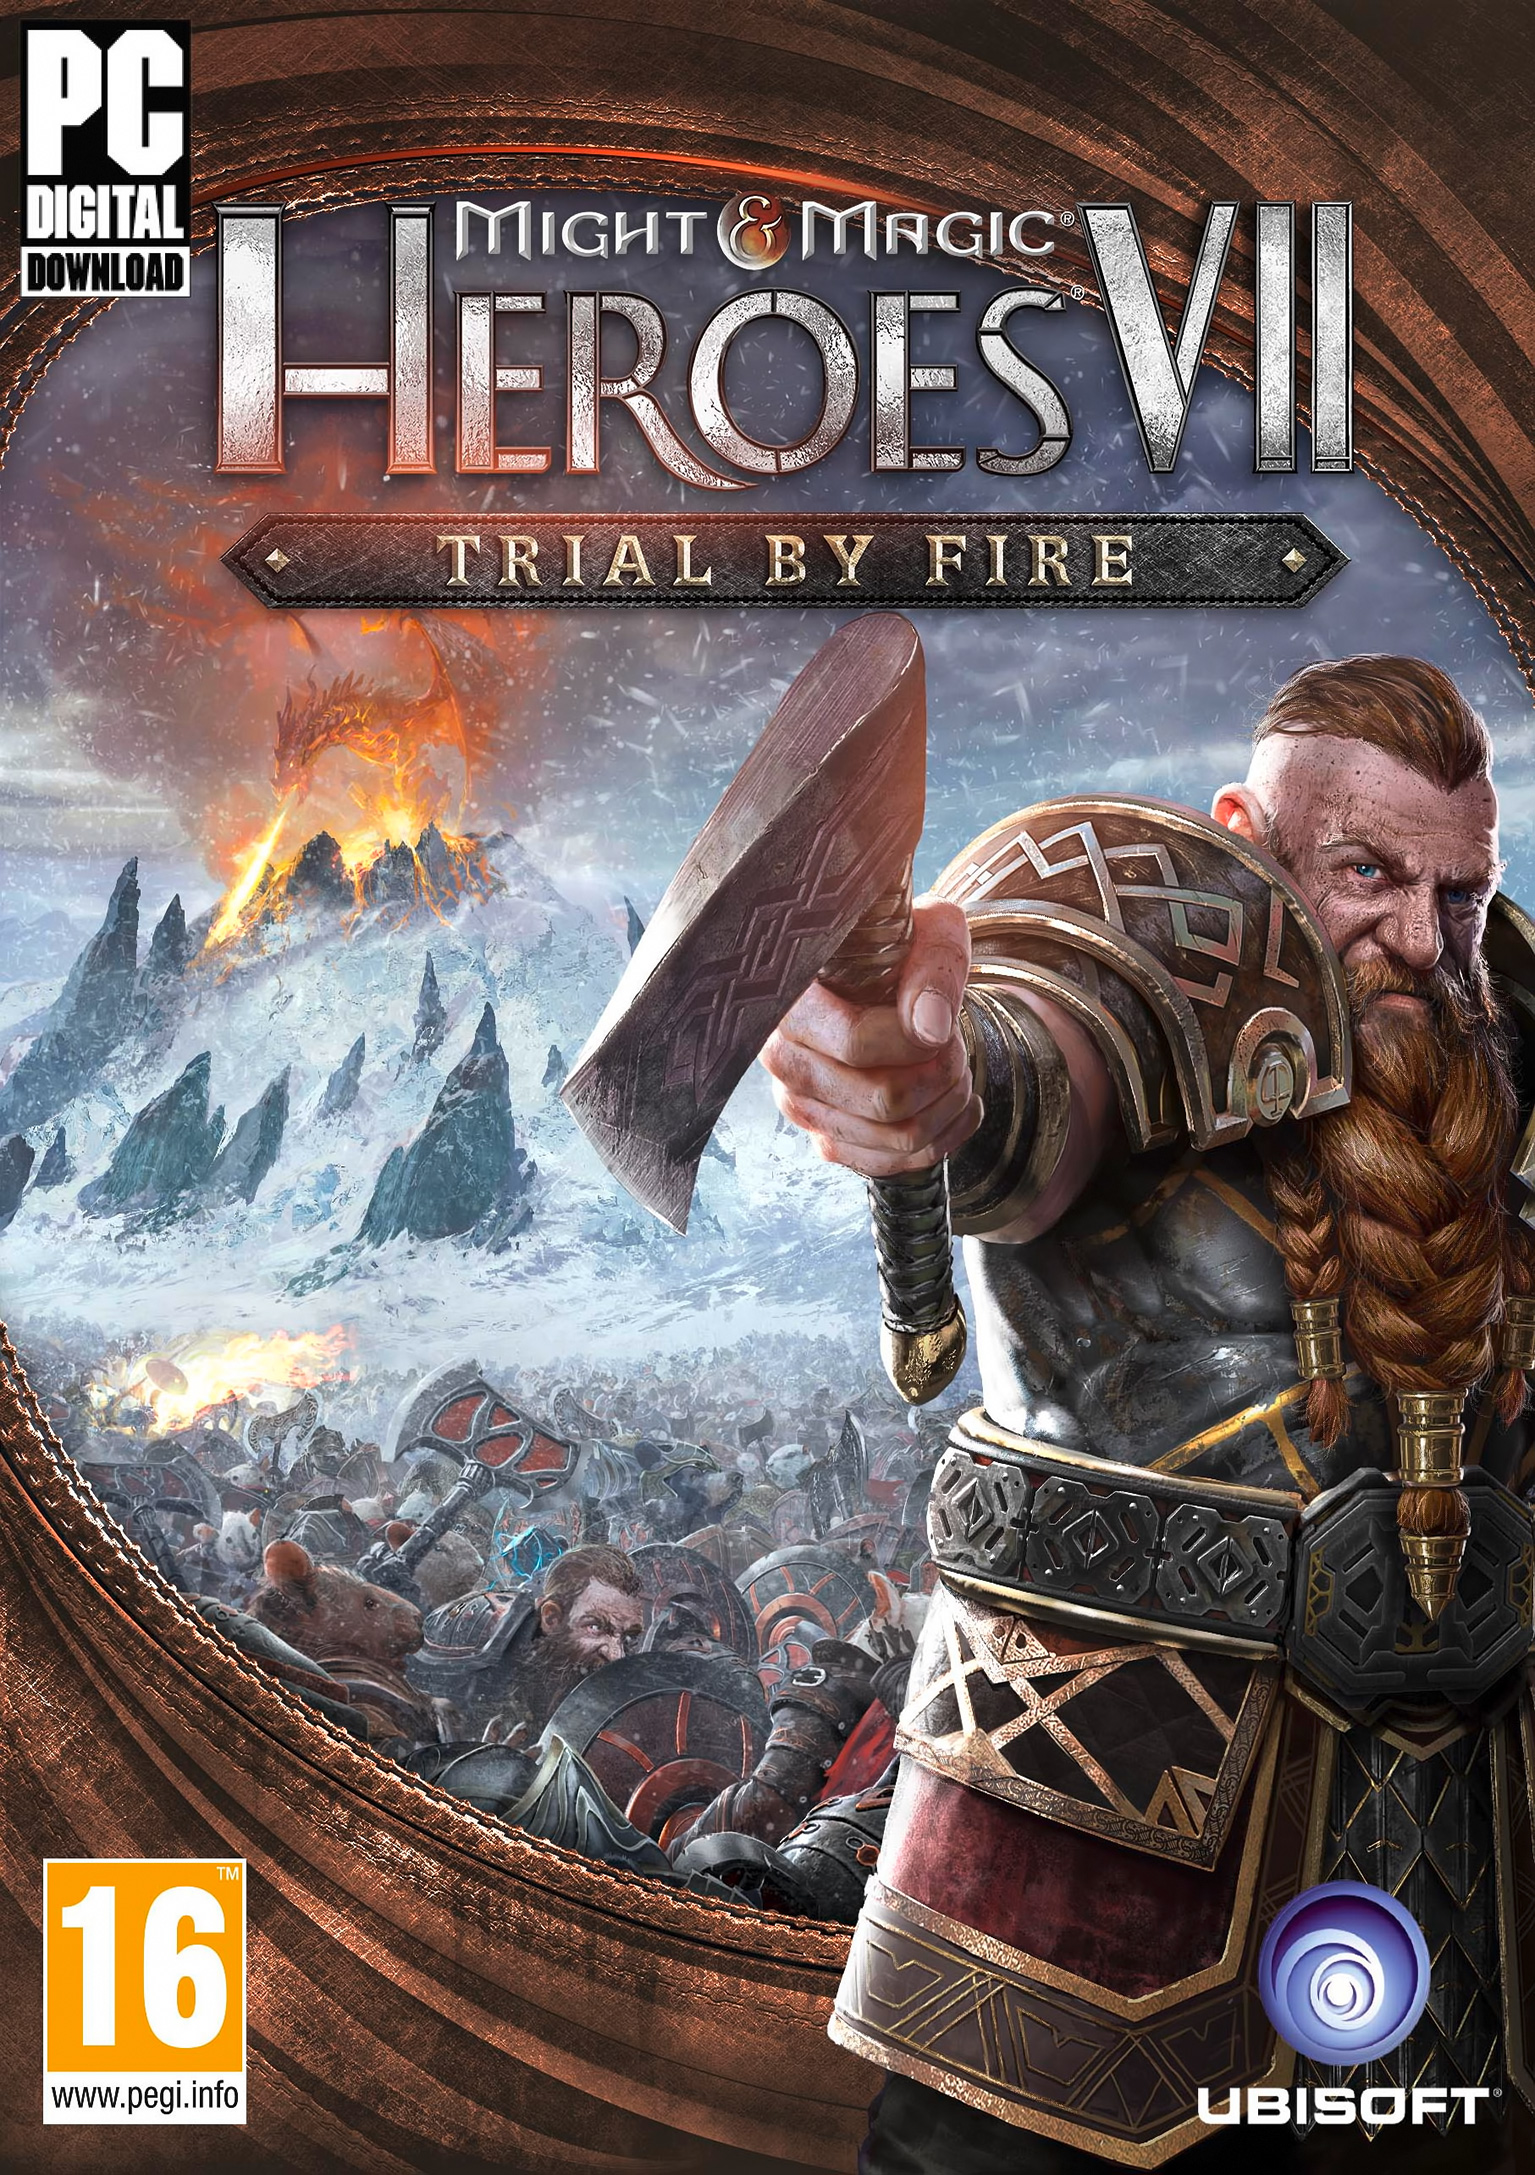 Might & Magic Heroes VII - Trial by Fire - predn DVD obal